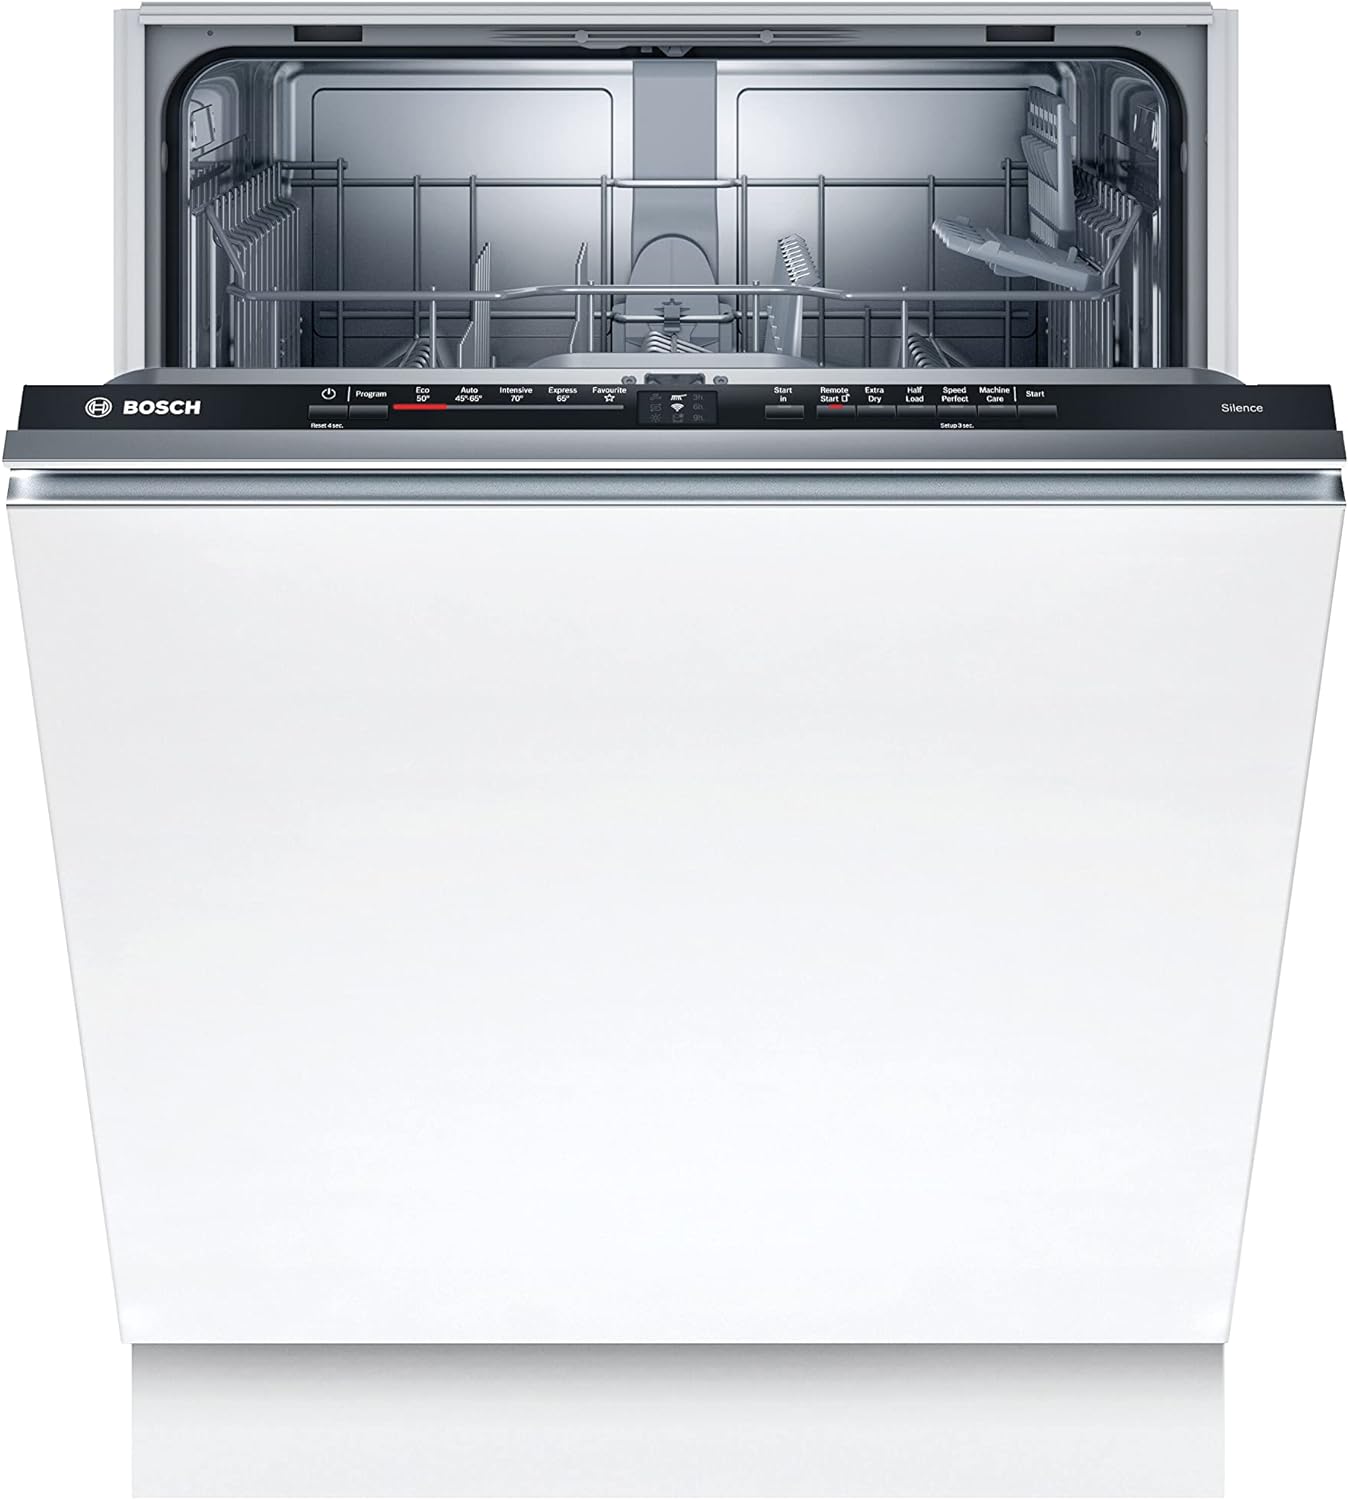 Bosch Home Kitchen Appliances Bosch SMV2ITX18G Serie 2 Fully Integrated Dishwasher with 12 place settings, Home Connect, ExtraDry, InfoLight and DosageAssist, 60cm [Energy Class E]